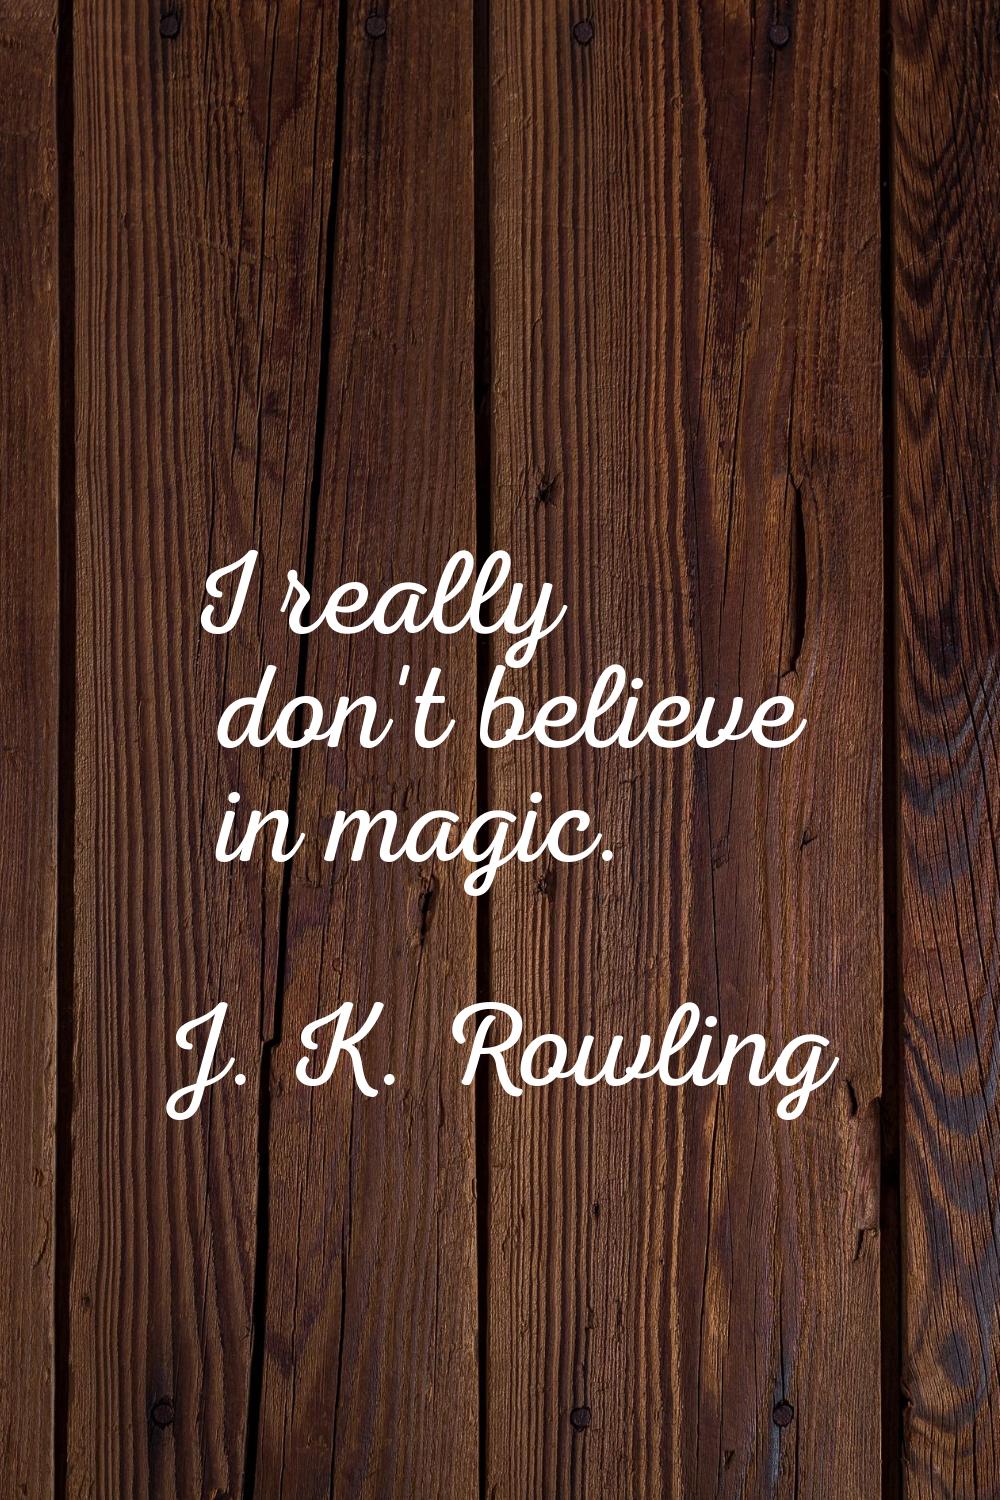 I really don't believe in magic.